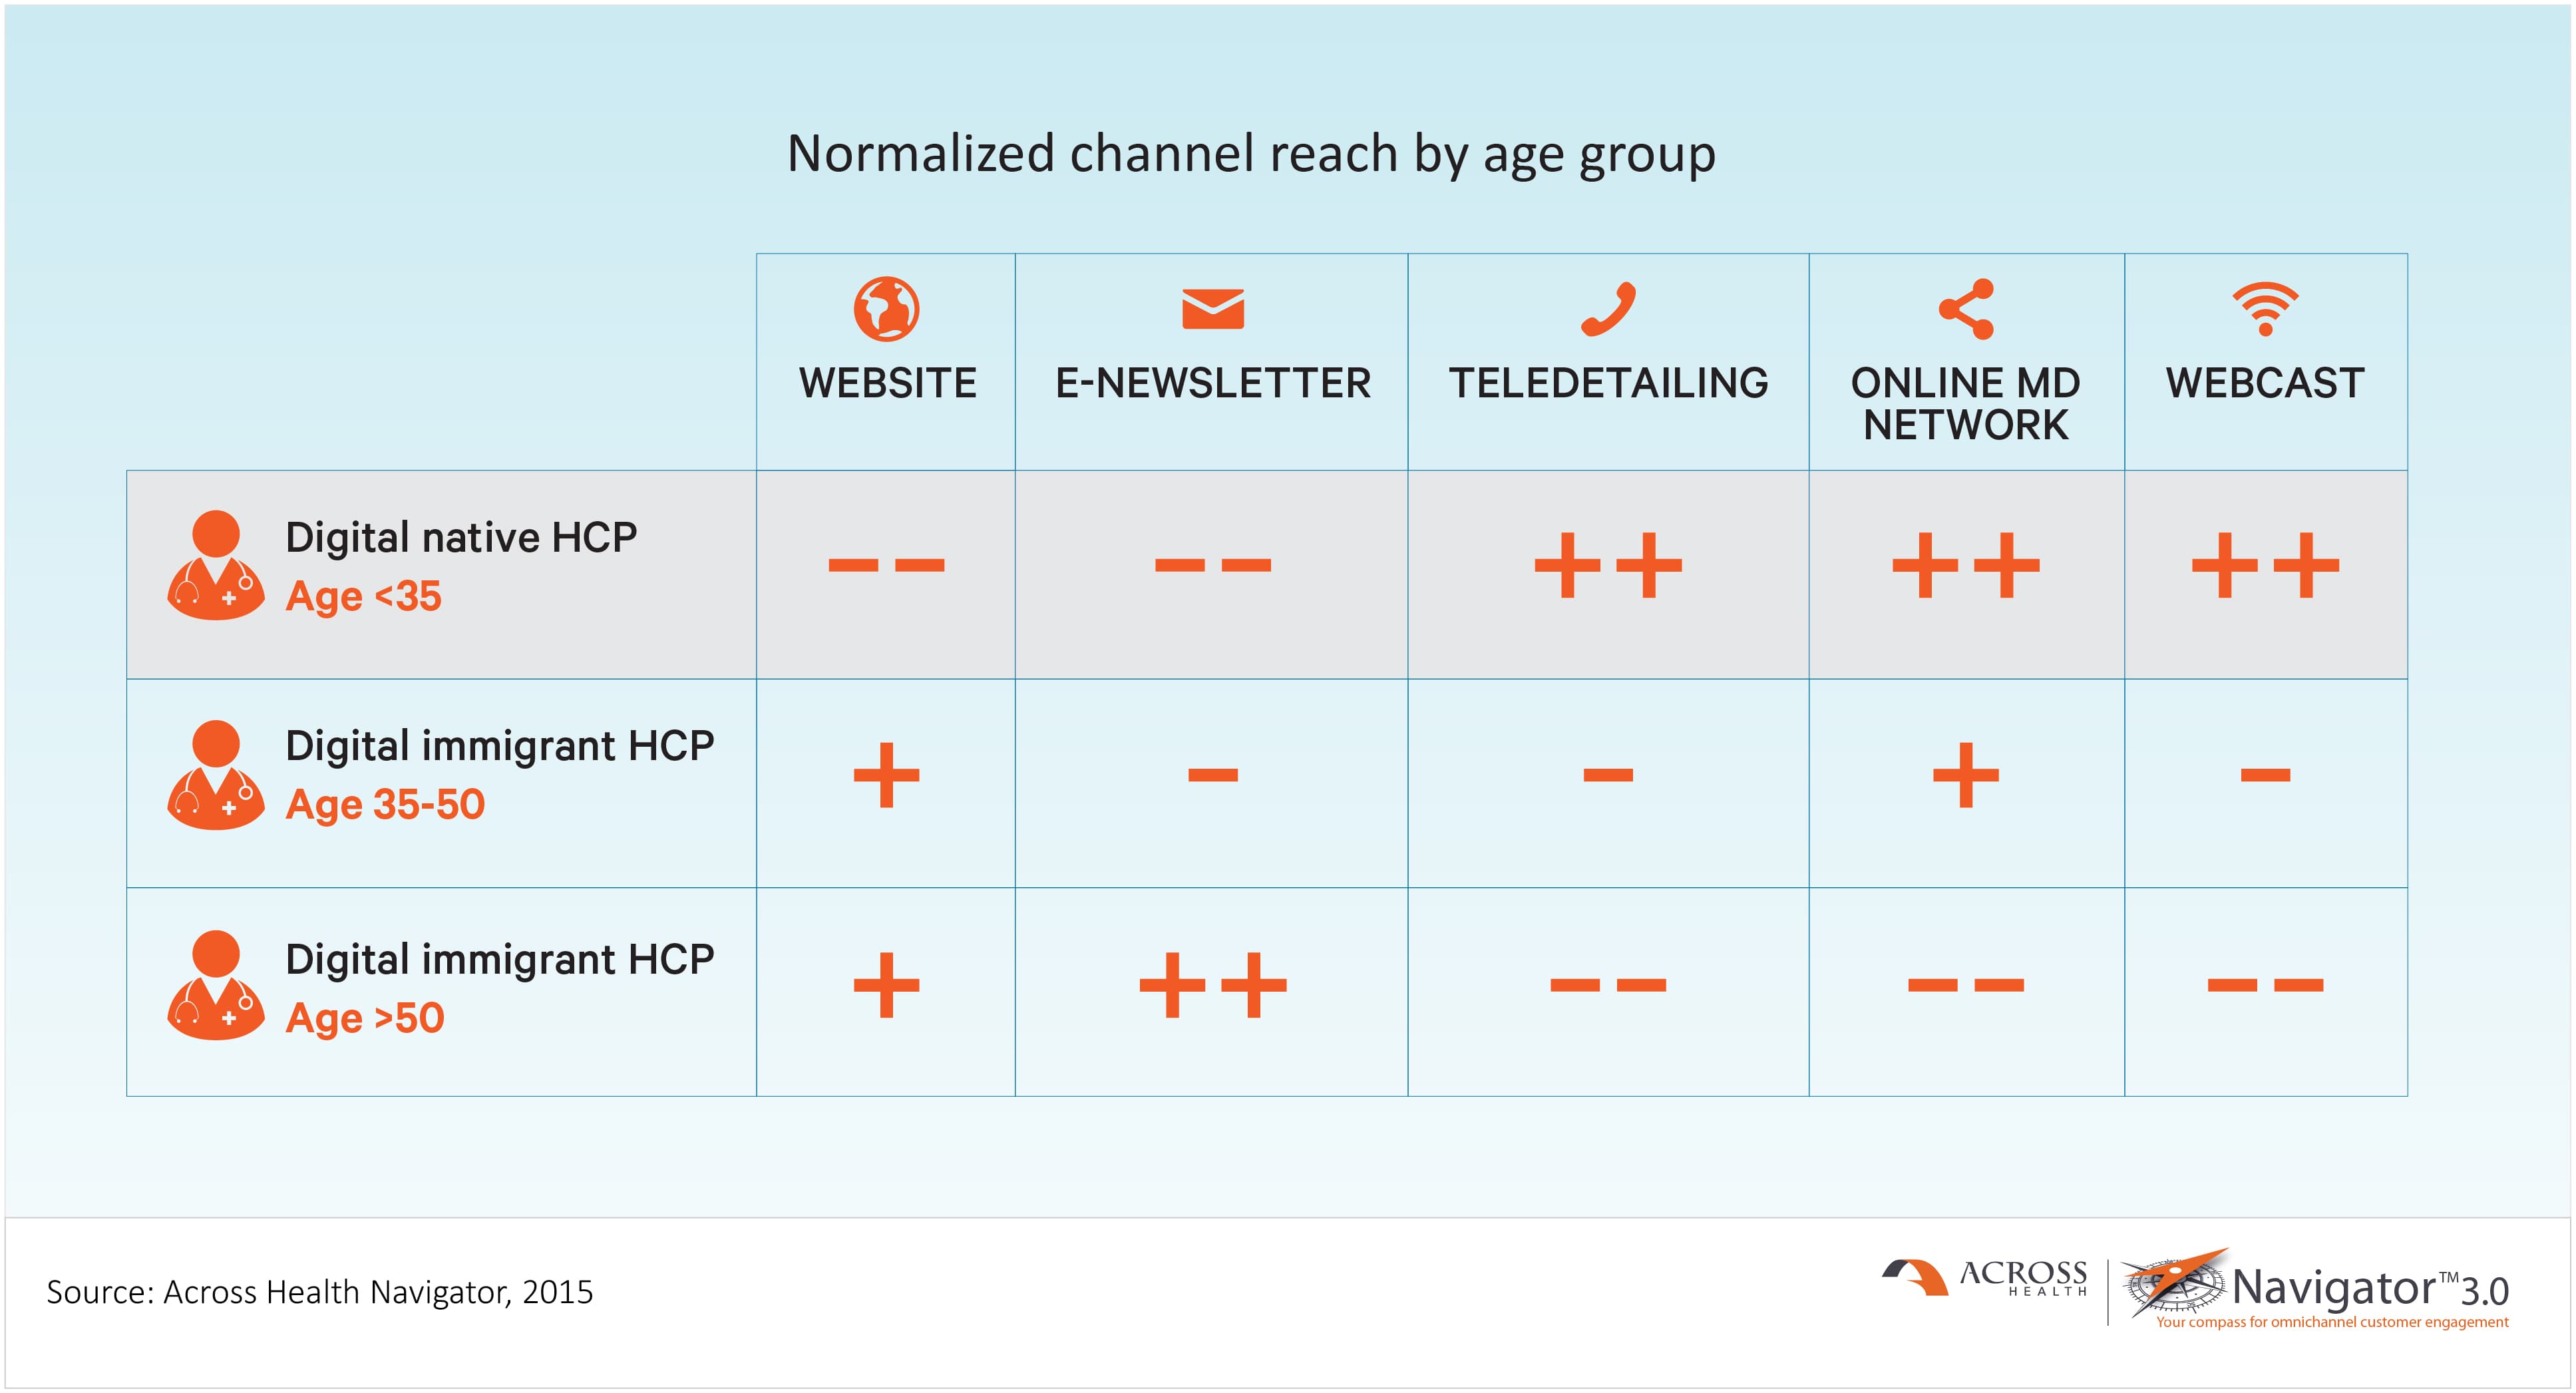 Normalized channel reach by age group